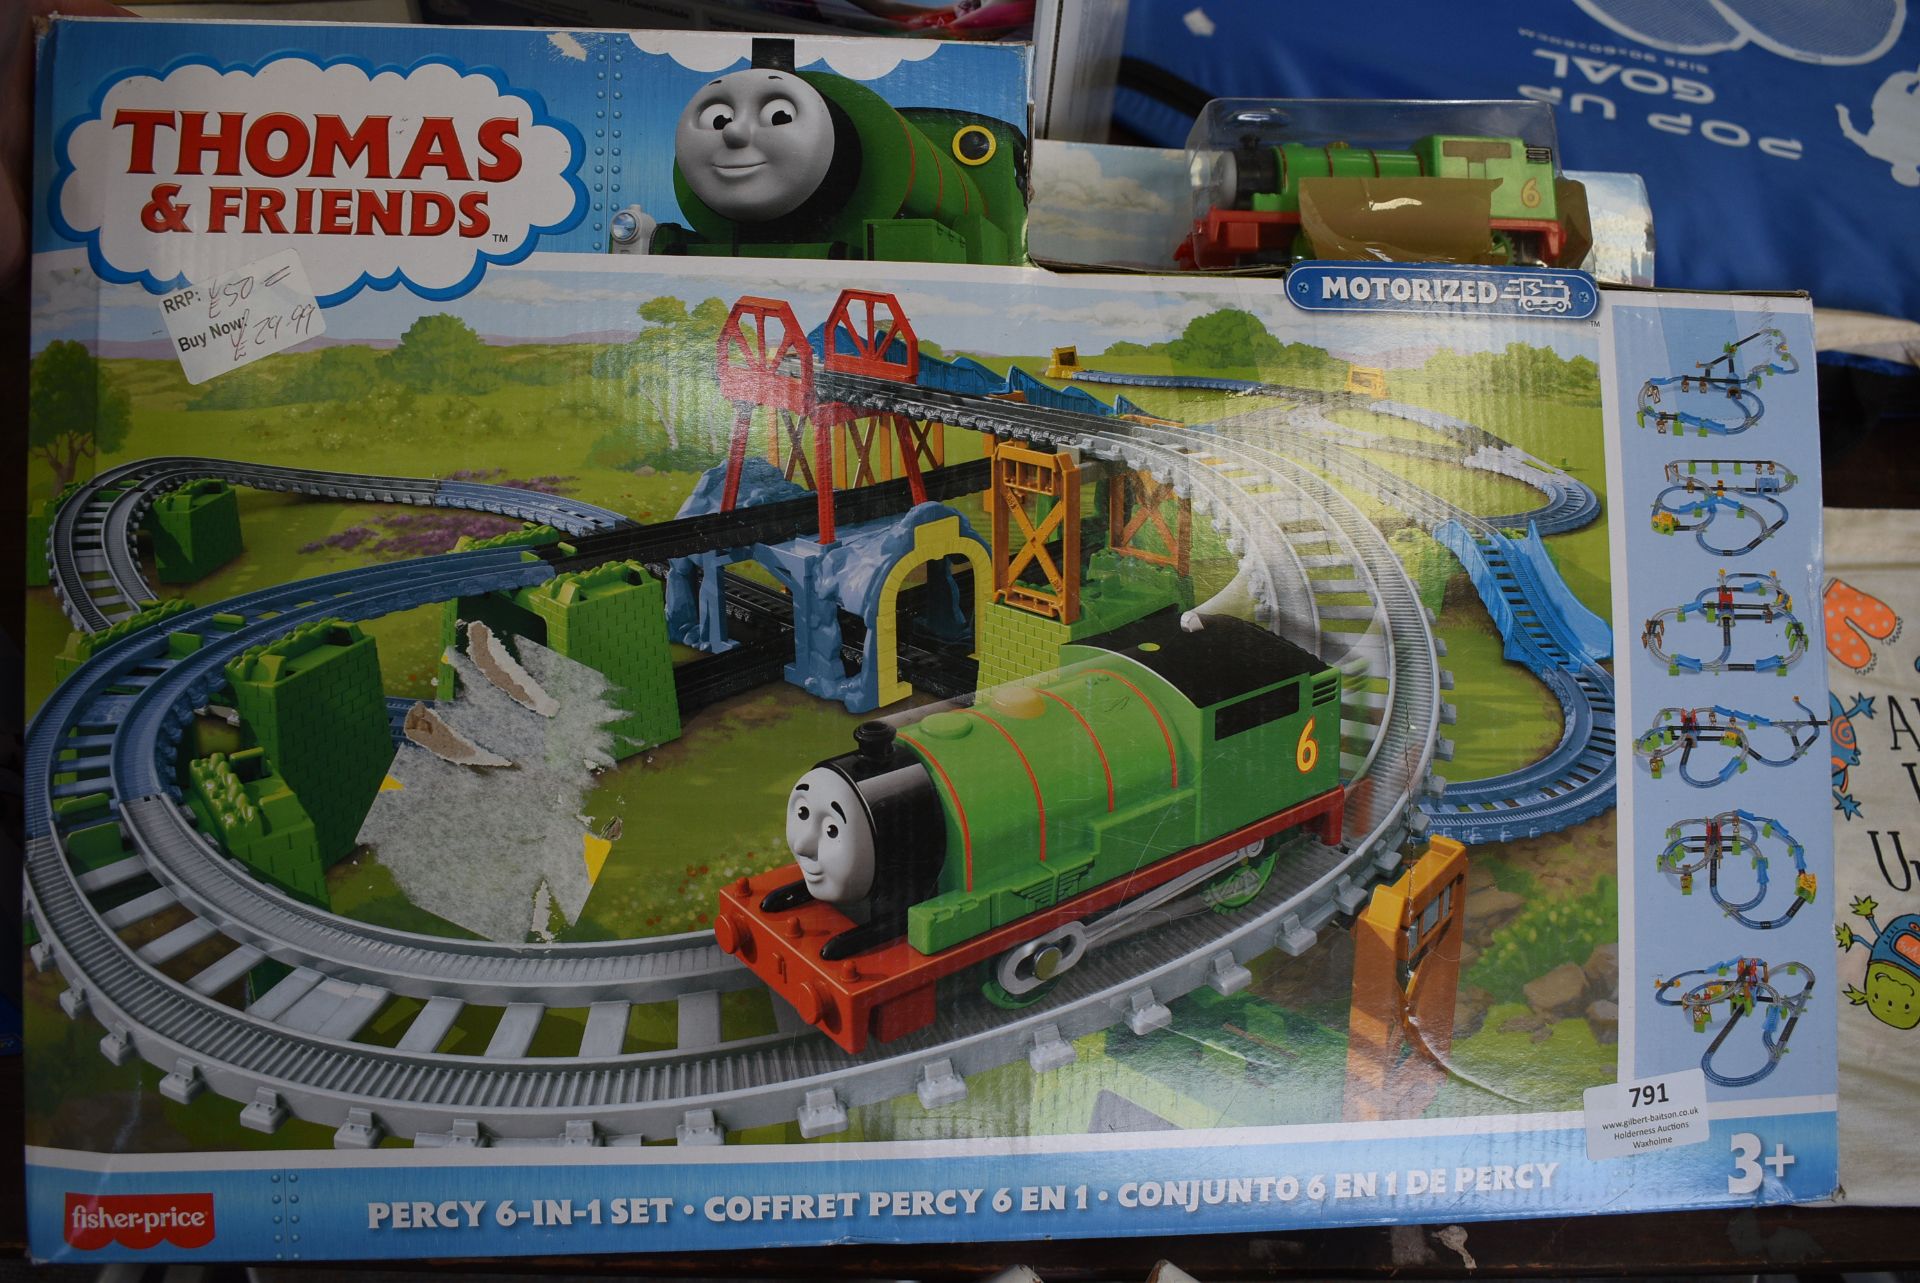 Thomas & Friends Percy 6-in-1 Set